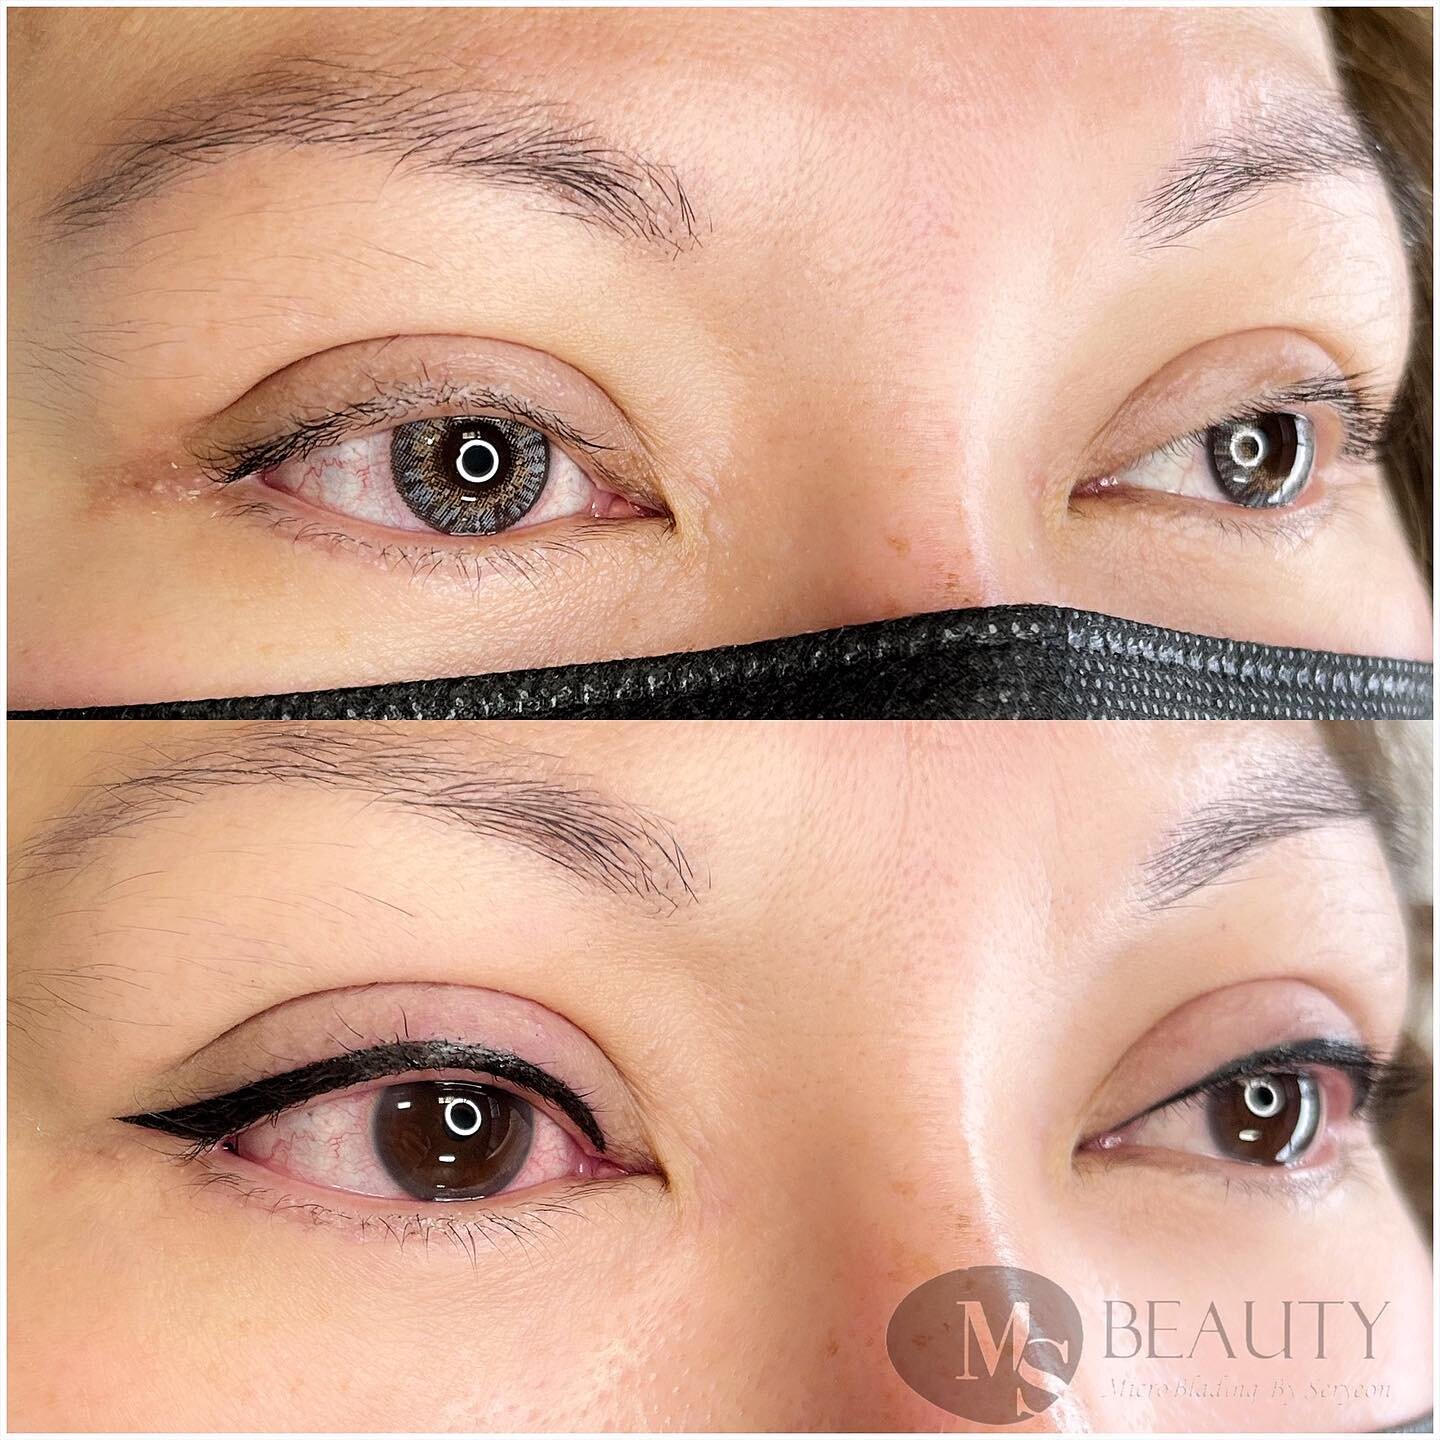 Eyeliner tattoo
Immediately  after
.
.

𝐌𝐬&nbsp;𝐛𝐞𝐚𝐮𝐭𝐲
⠀
▪️Introduced and published in reliable and recognized media oulets in Korea (VJ특공대,&nbsp;무한지대&nbsp;큐등&nbsp;다수의&nbsp;언론.잡지에&nbsp;소개됨) 
▪️Acquired Cosmetology 